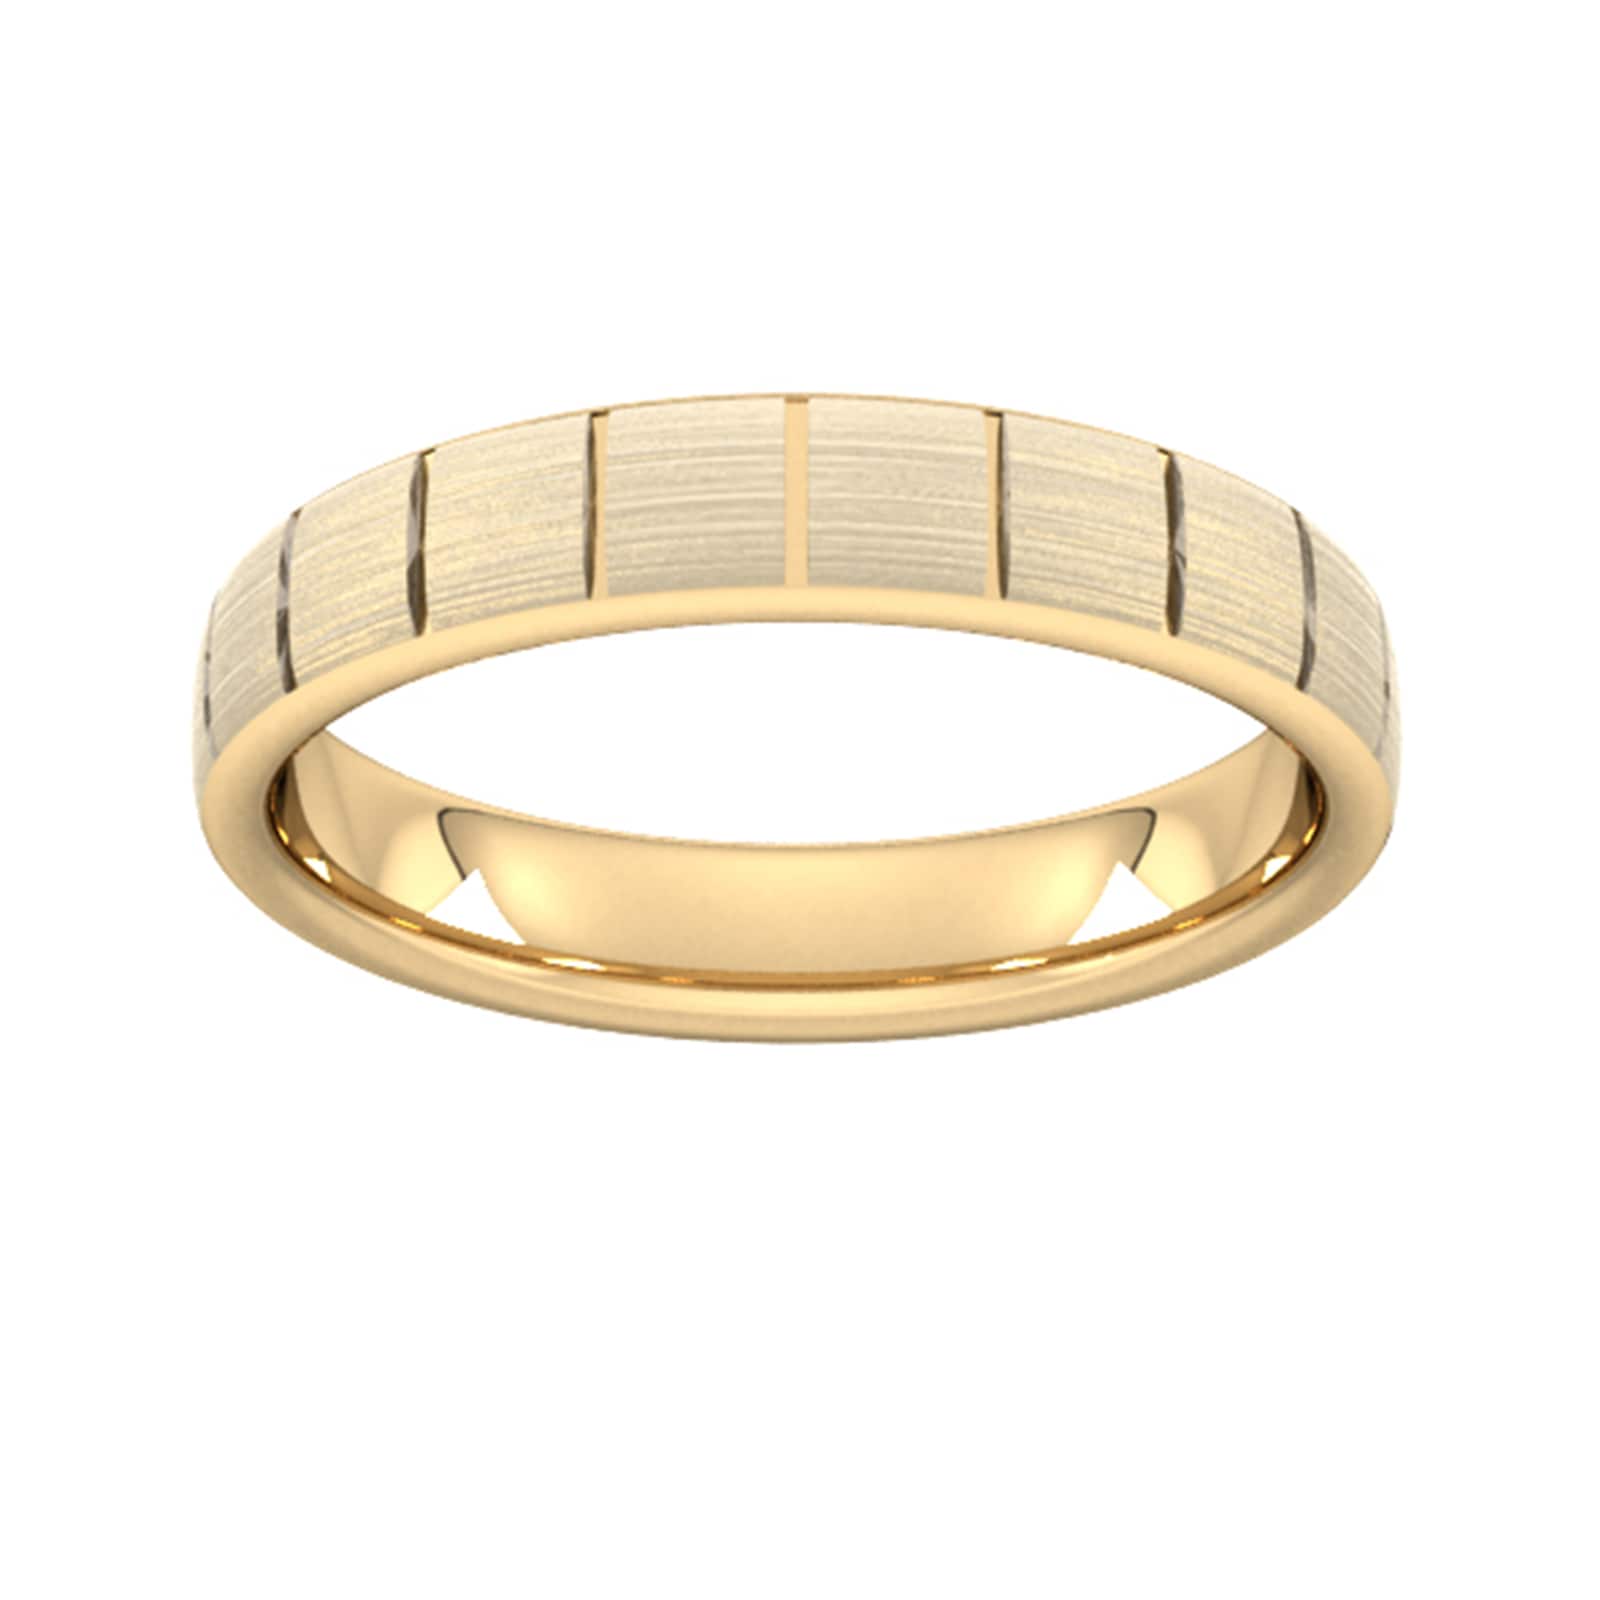 4mm Traditional Court Standard Vertical Lines Wedding Ring In 9 Carat Yellow Gold - Ring Size Q